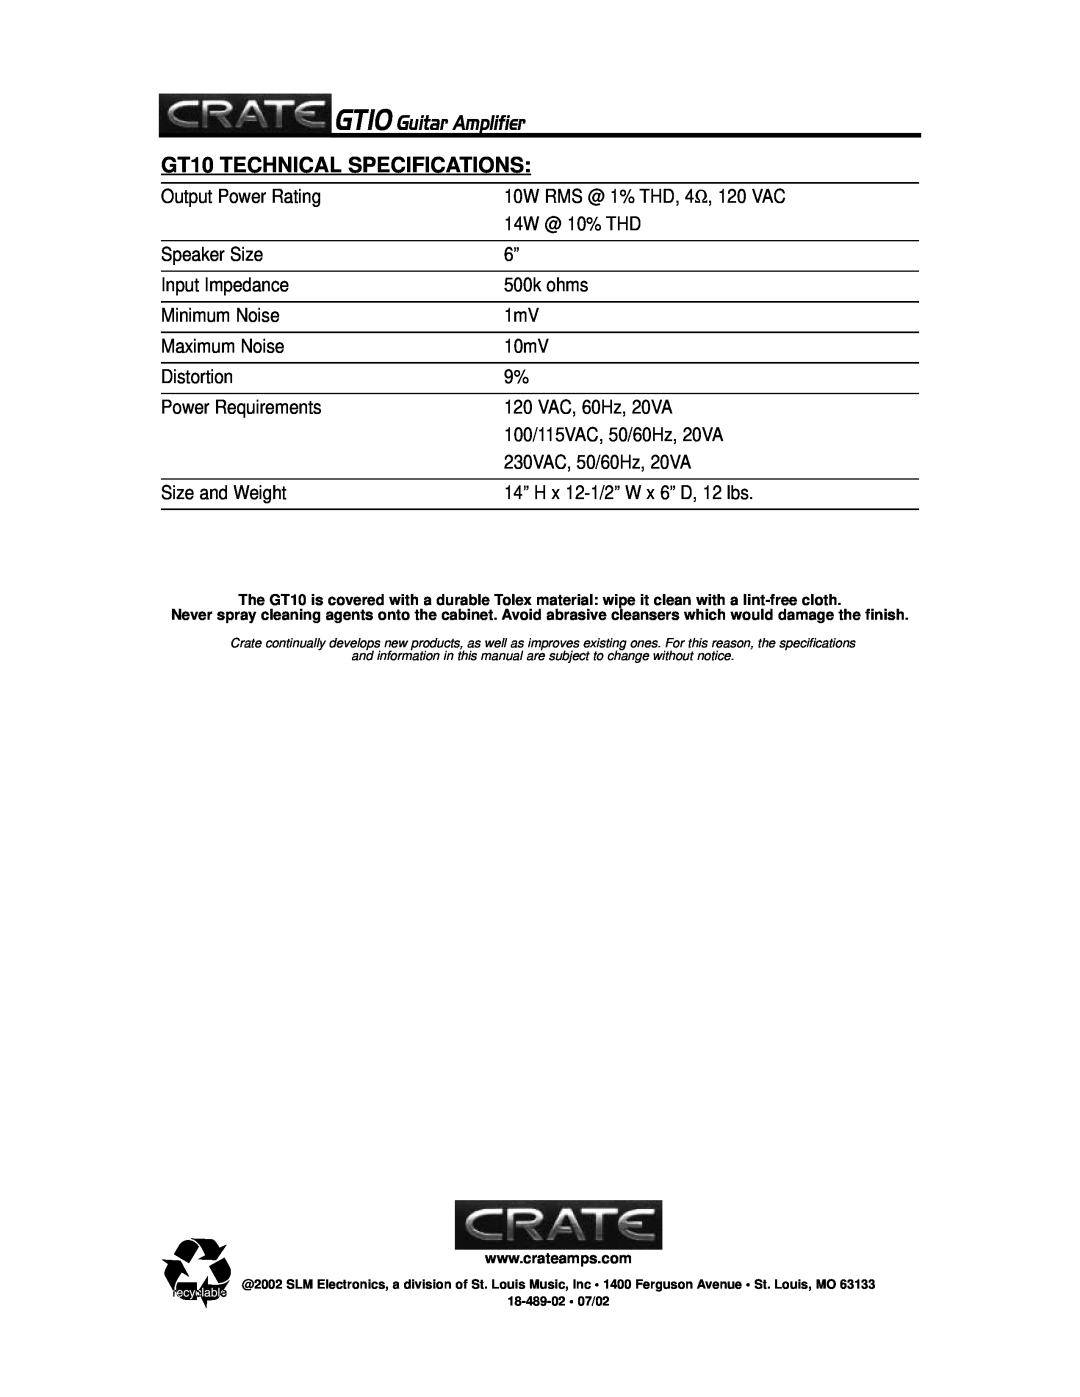 Crate Amplifiers owner manual GT10 Guitar Amplifier, GT10 TECHNICAL SPECIFICATIONS 